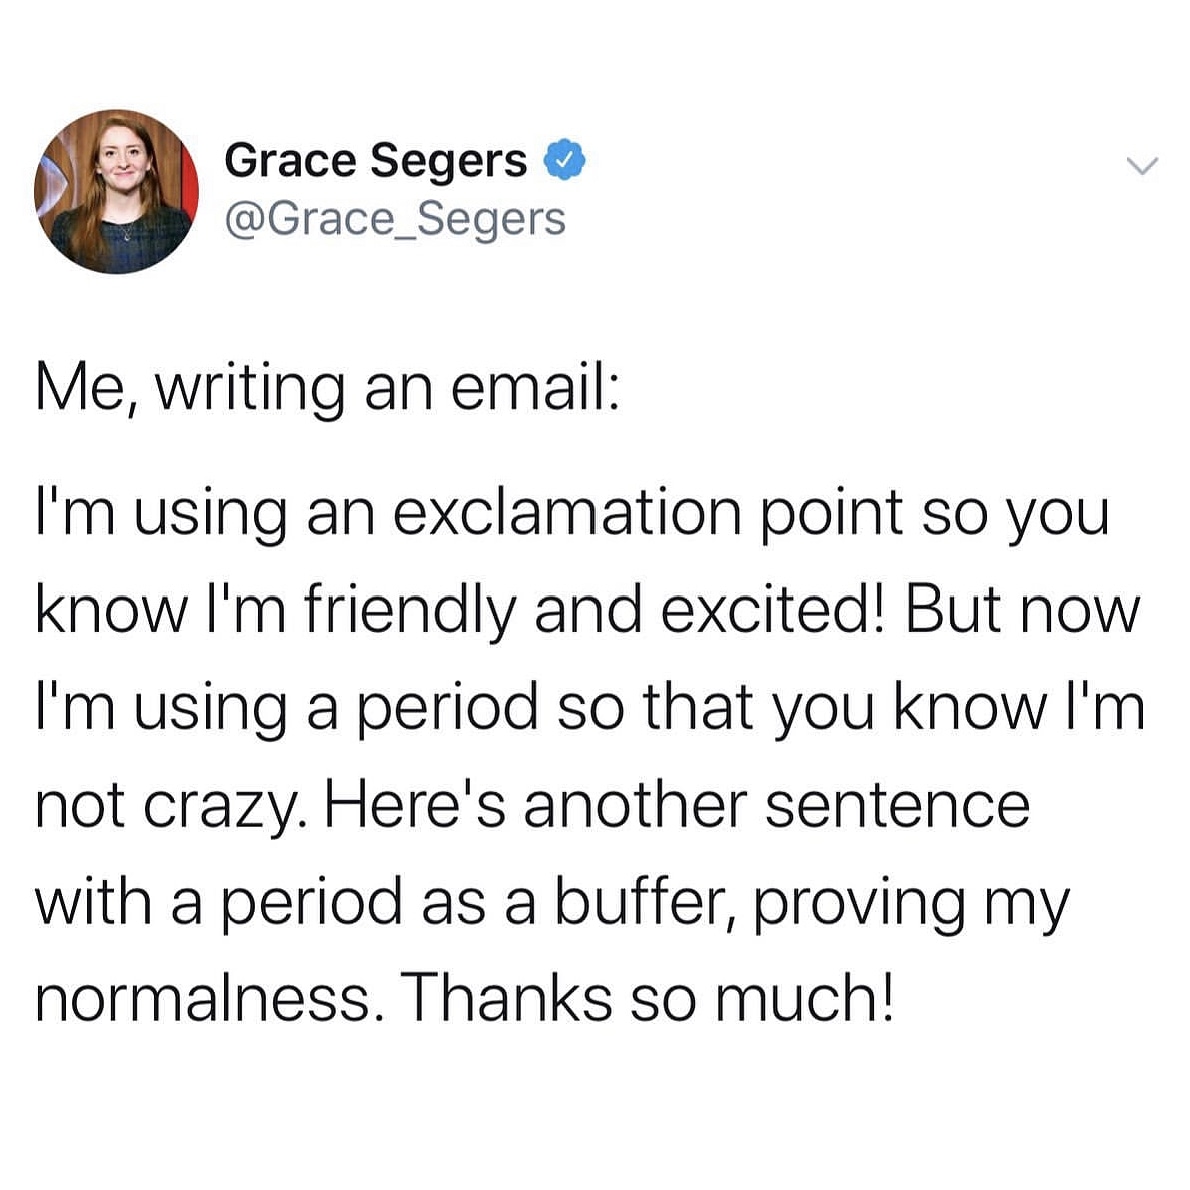 React - Grace Segers Me, writing an email I'm using an exclamation point so you know I'm friendly and excited! But now I'm using a period so that you know I'm not crazy. Here's another sentence with a period as a buffer, proving my normalness. Thanks so m